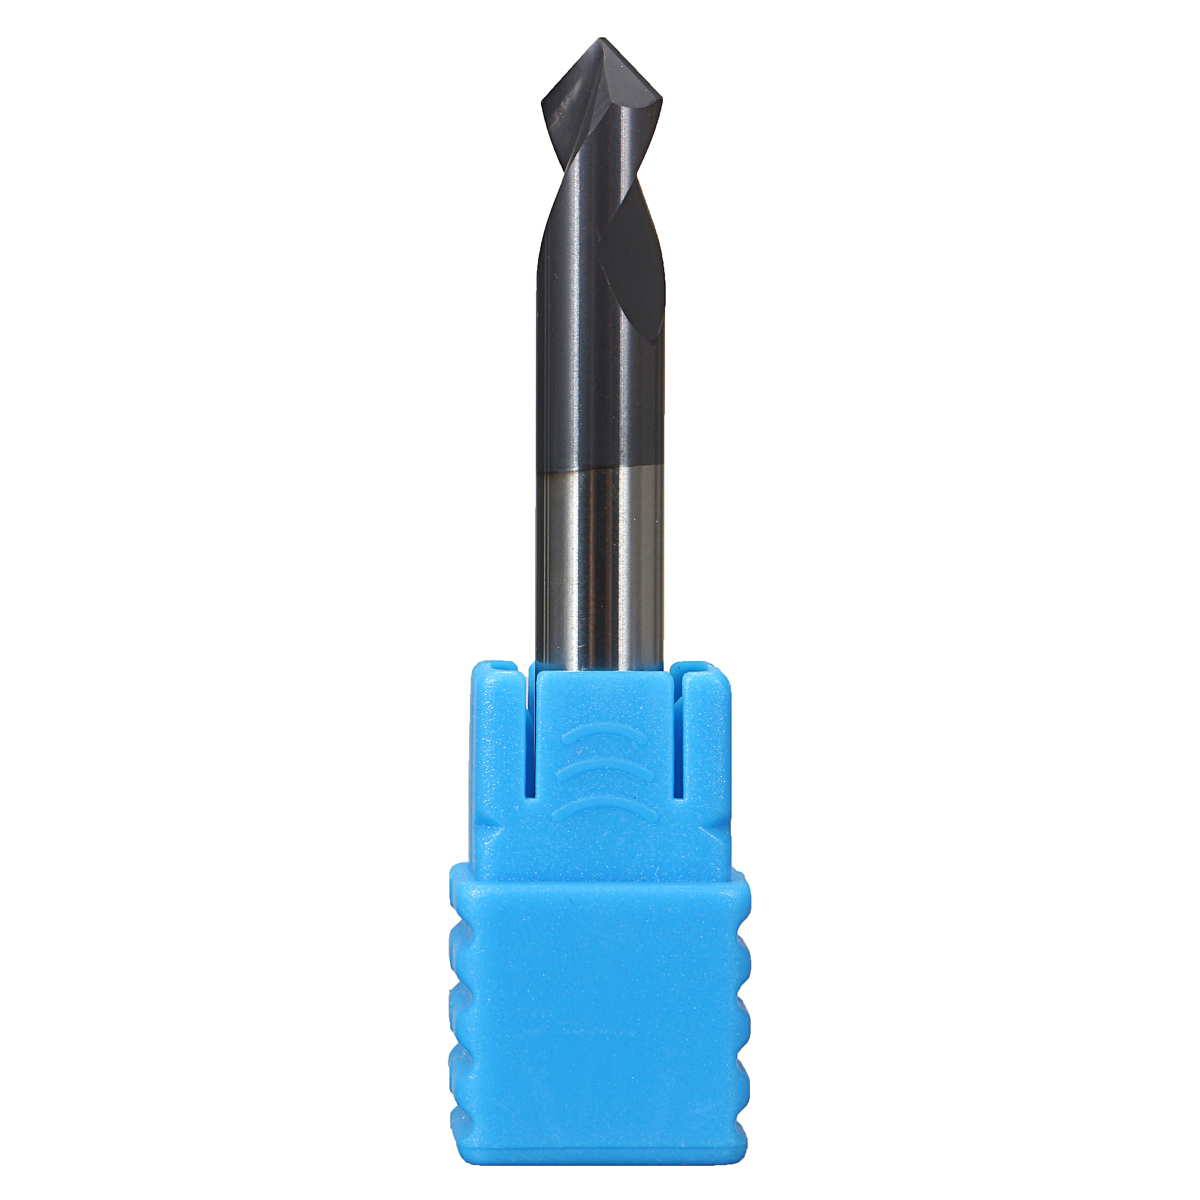 Drillpro-2-Flutes-6mm-Carbide-Chamfer-Mill-90-Degree-HRC45-Milling-Cutter-1108522-9